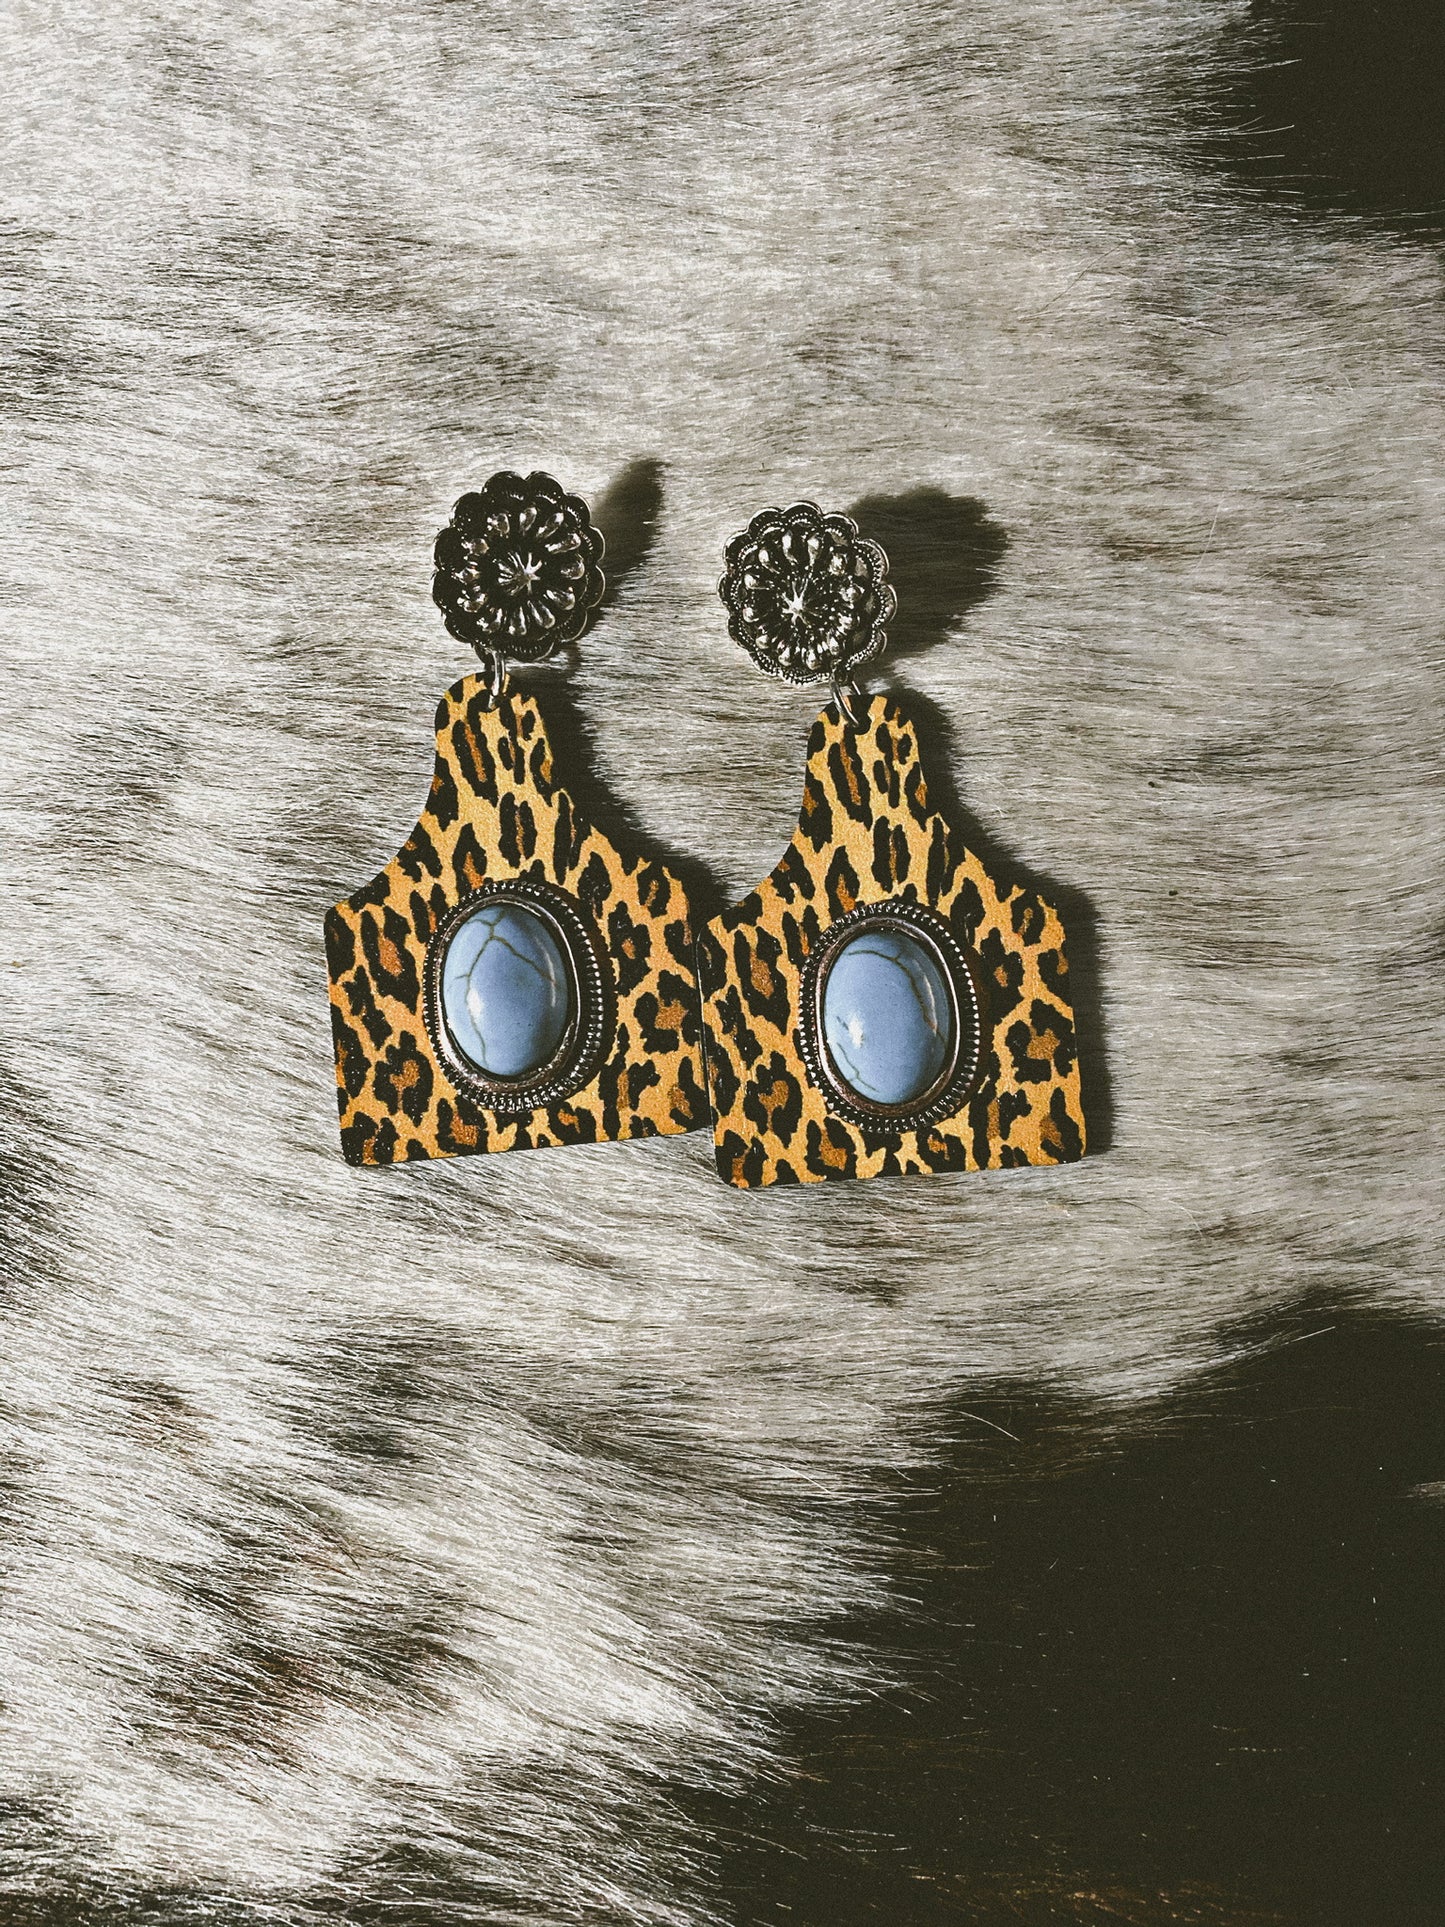 Turquoise and Leopard Wood Cattle Earrings